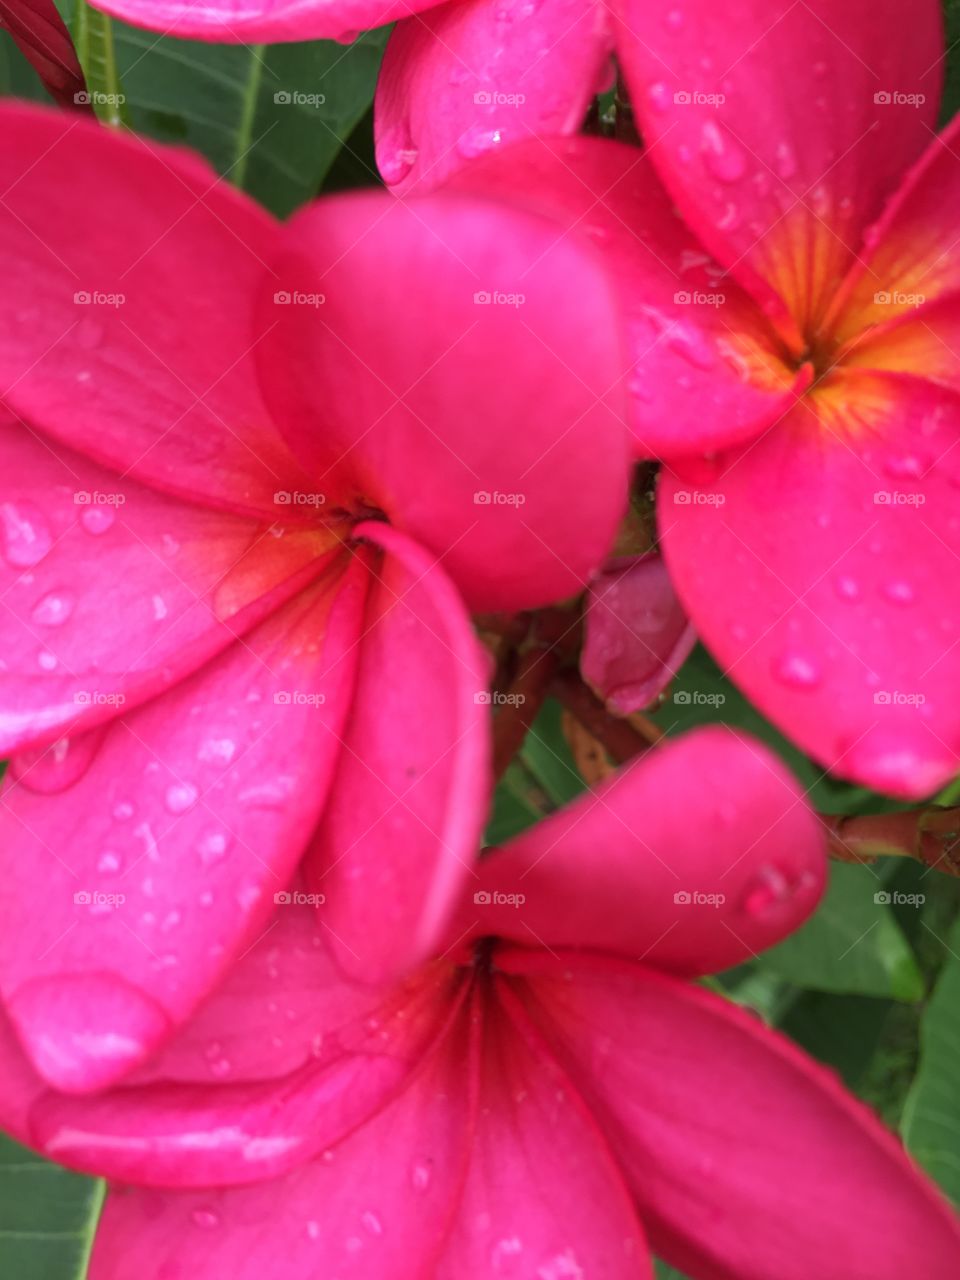 Hot pink flowers with beads of rain